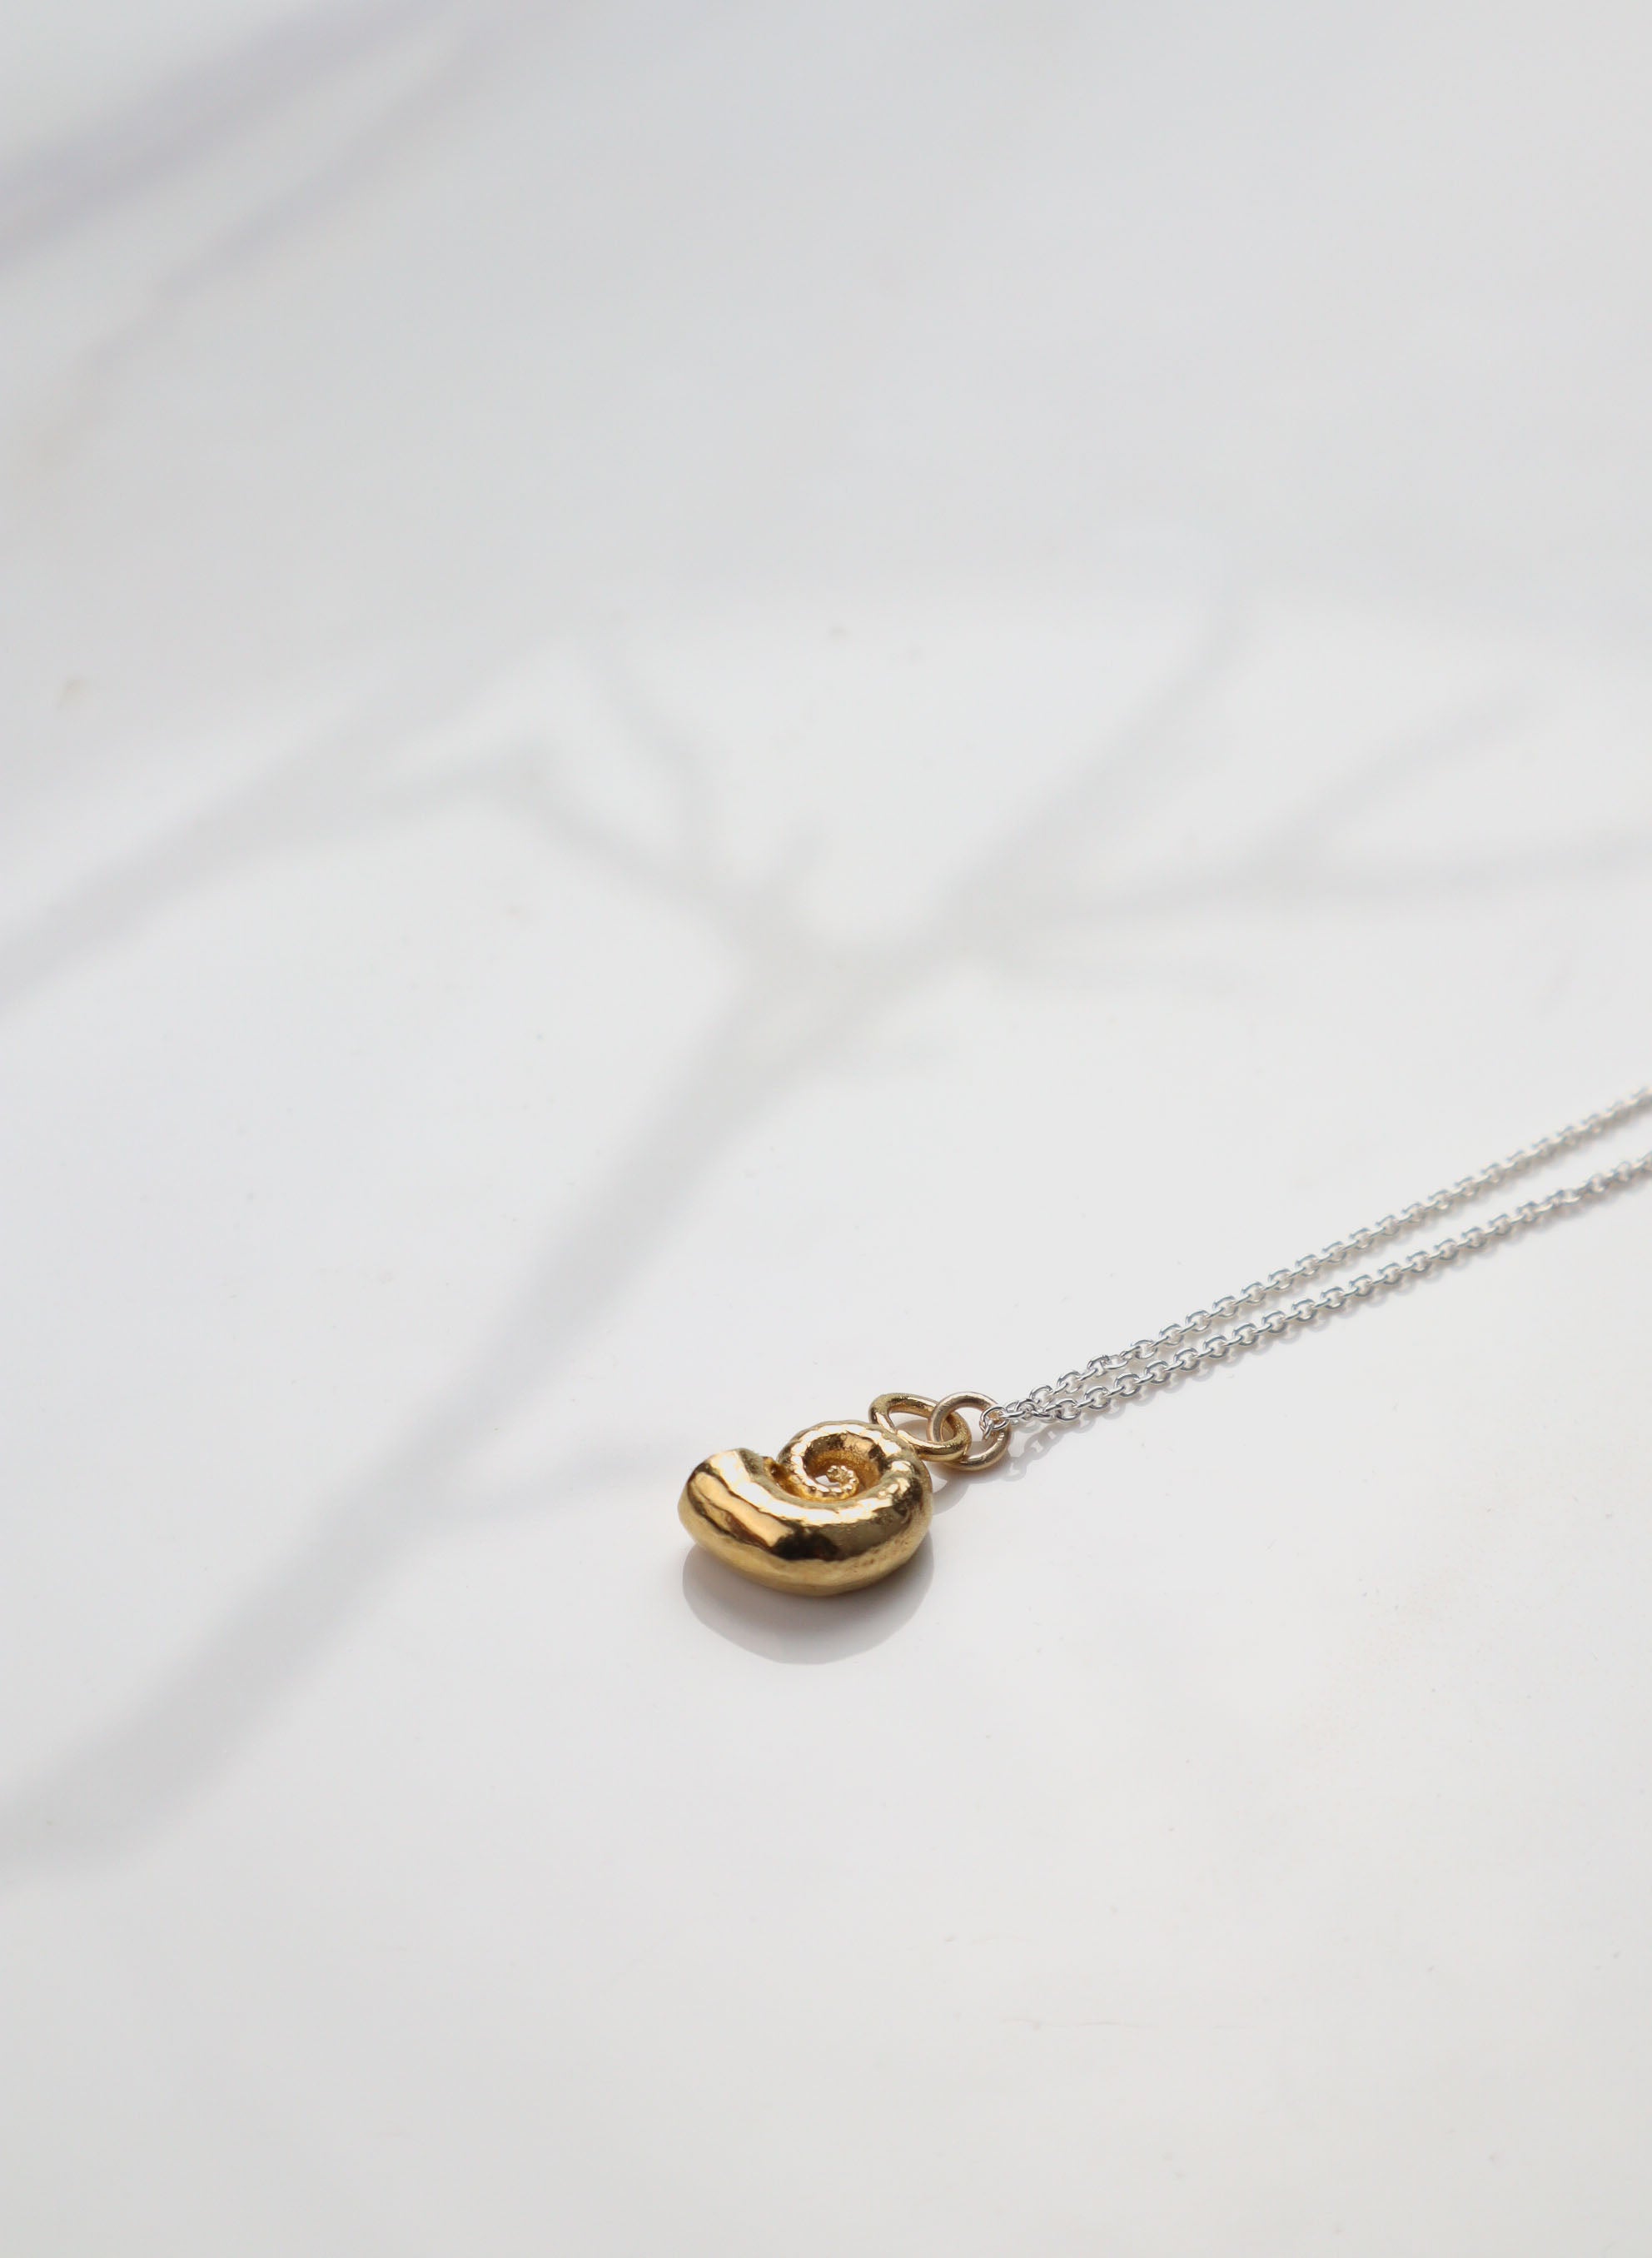 Spiral Shell Necklace - Gold and Silver